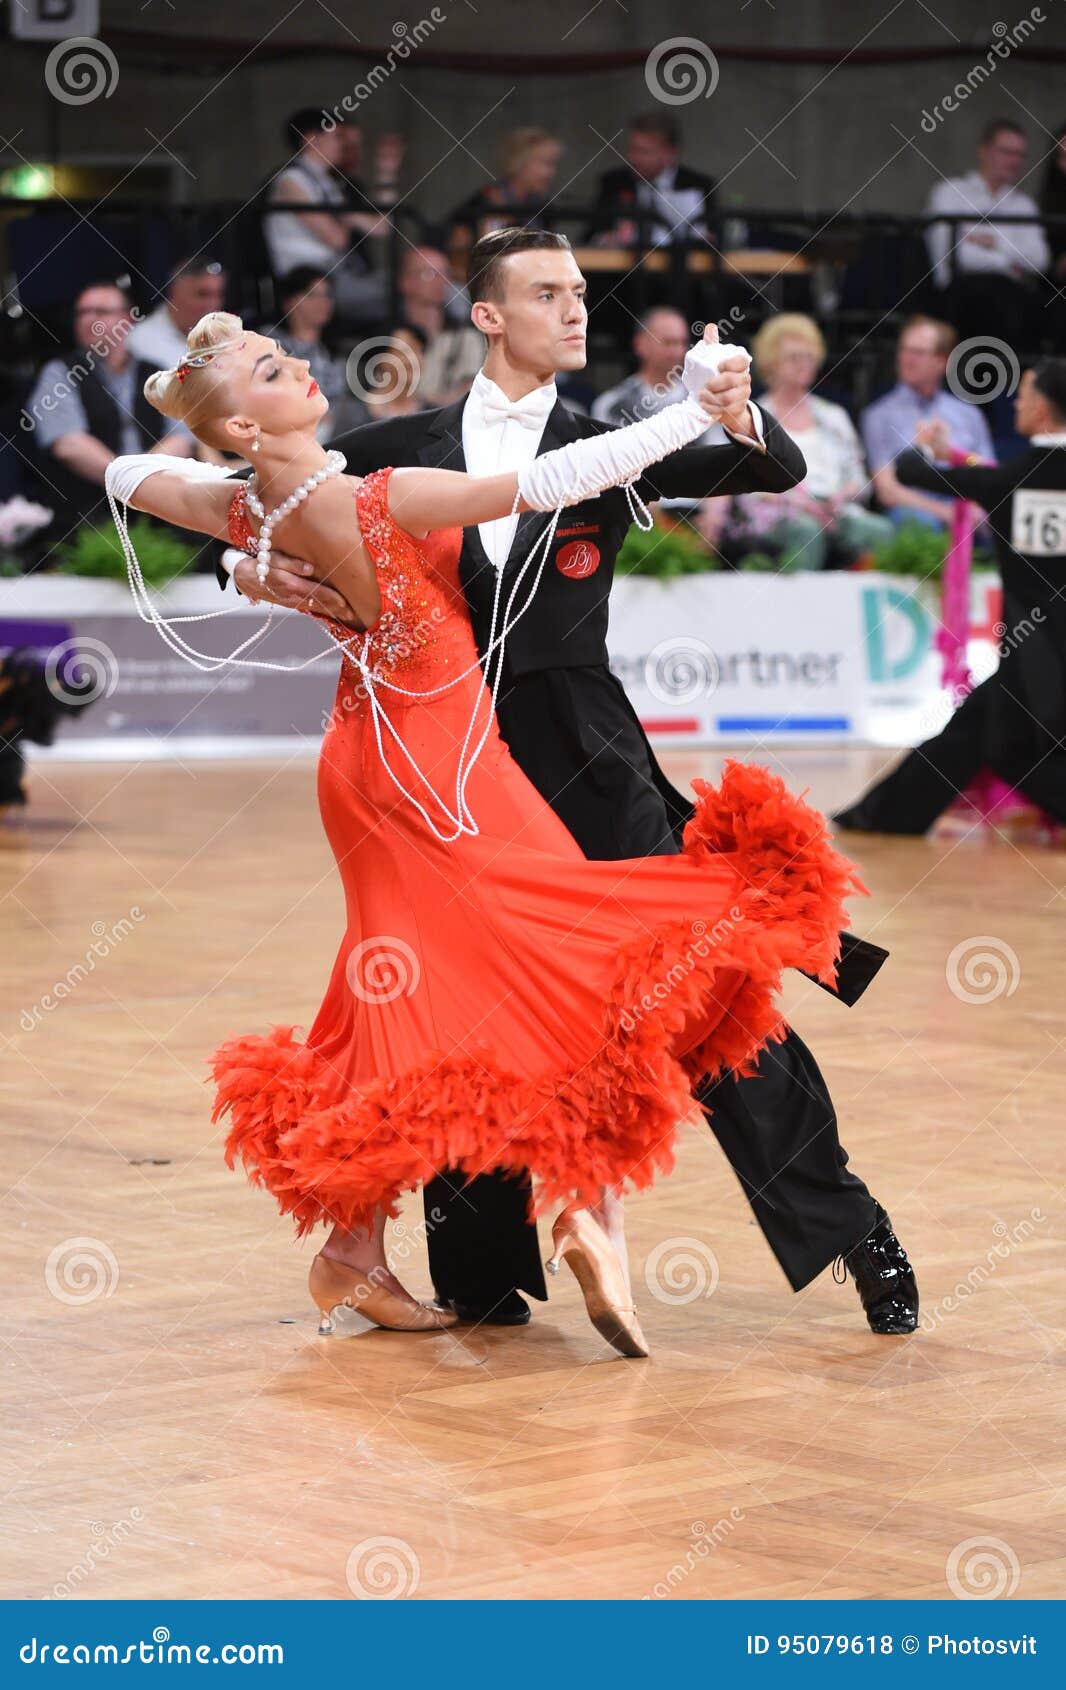 An Unidentified Dance Couple In A Dance Pose During Grand